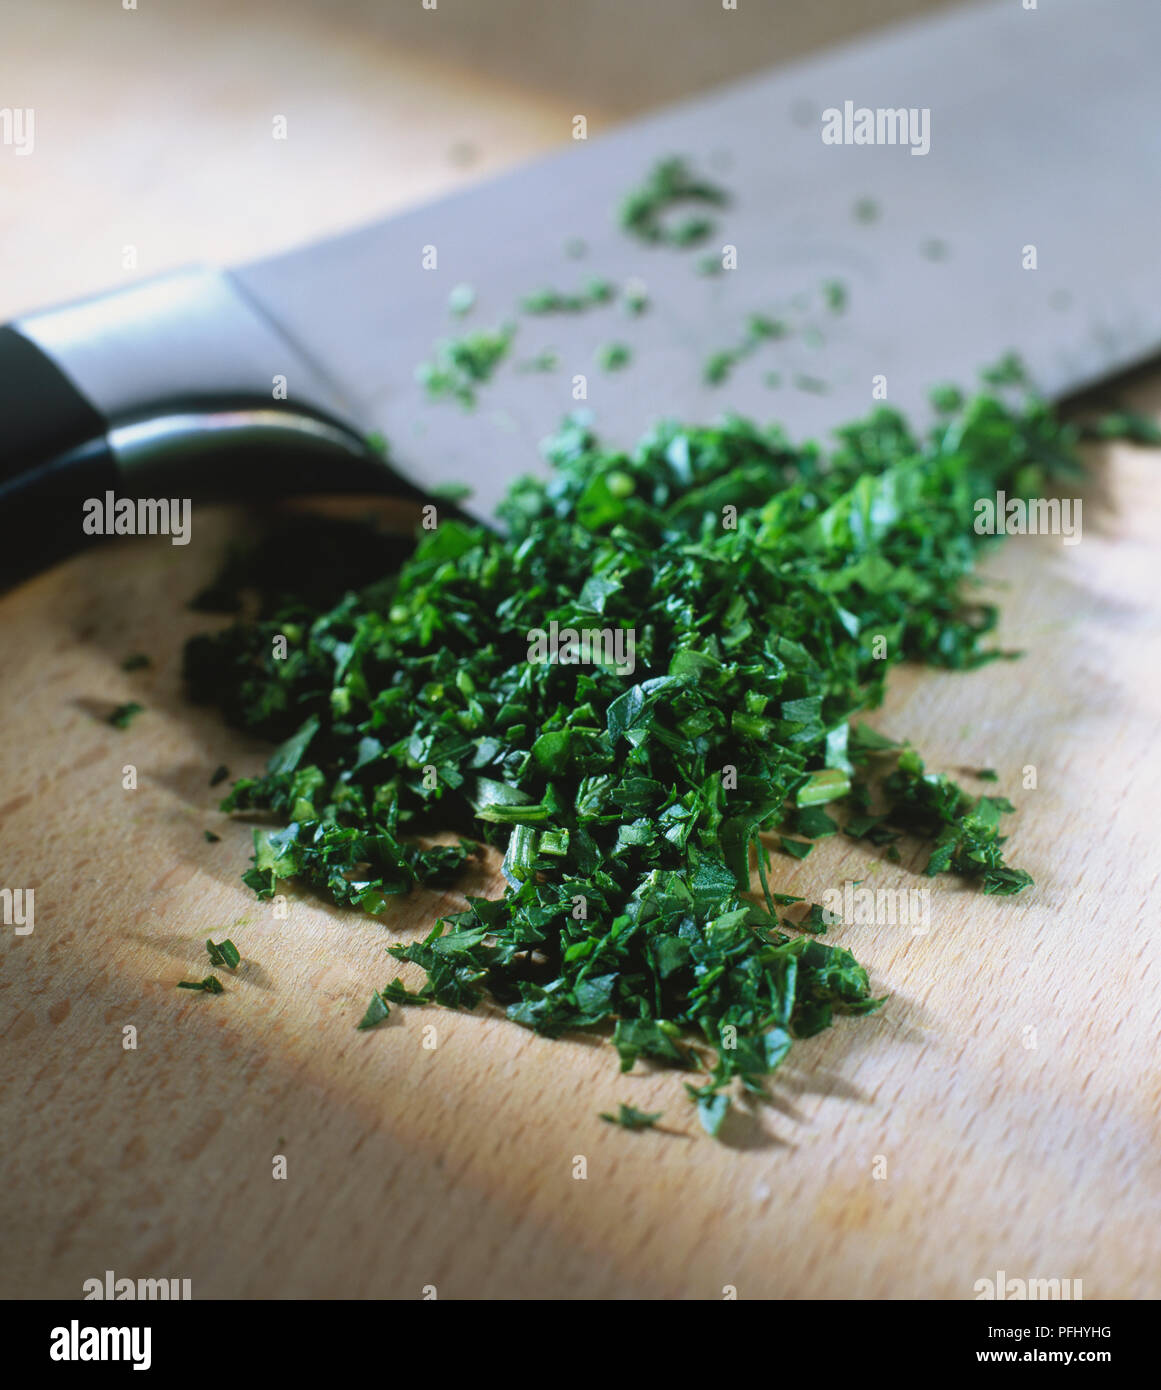 Petroselinum crispum, finely chopped Parsley leaves and a knife on a wooden board, close up. Stock Photo